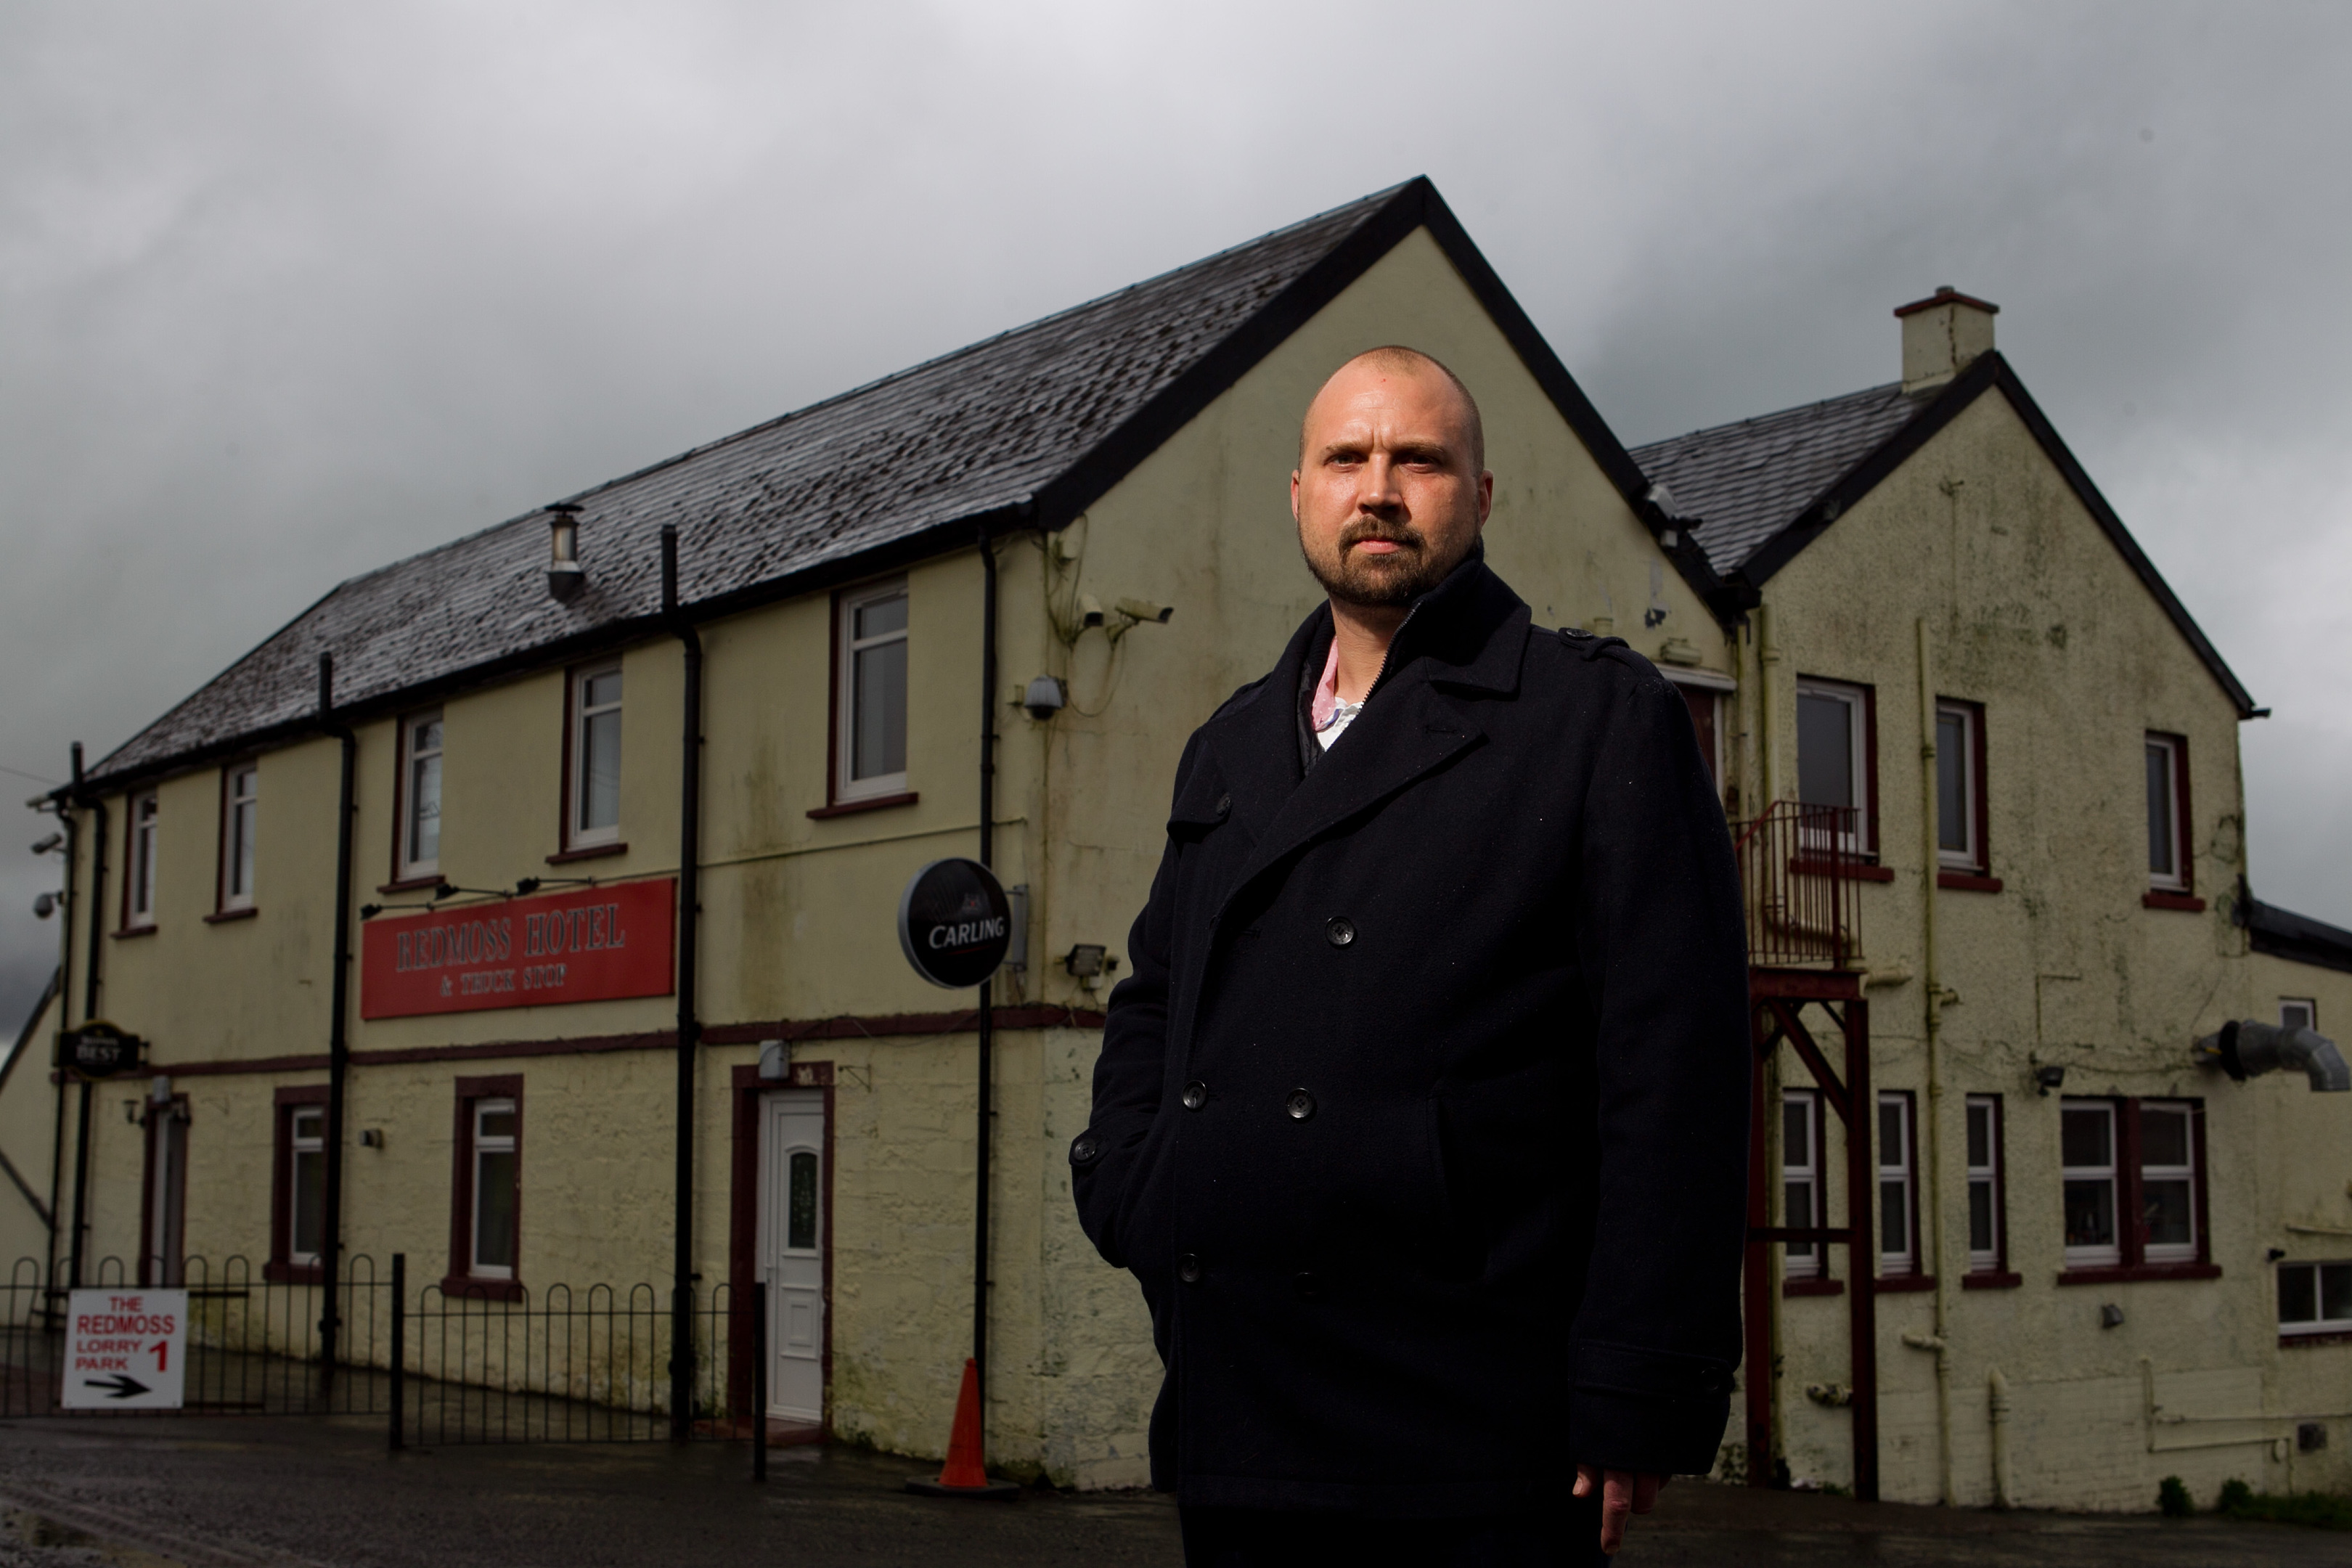 Arpad Halasz, who works at the Red Moss Hotel and Truckstop (Andrew Cawley / DC Thomson)